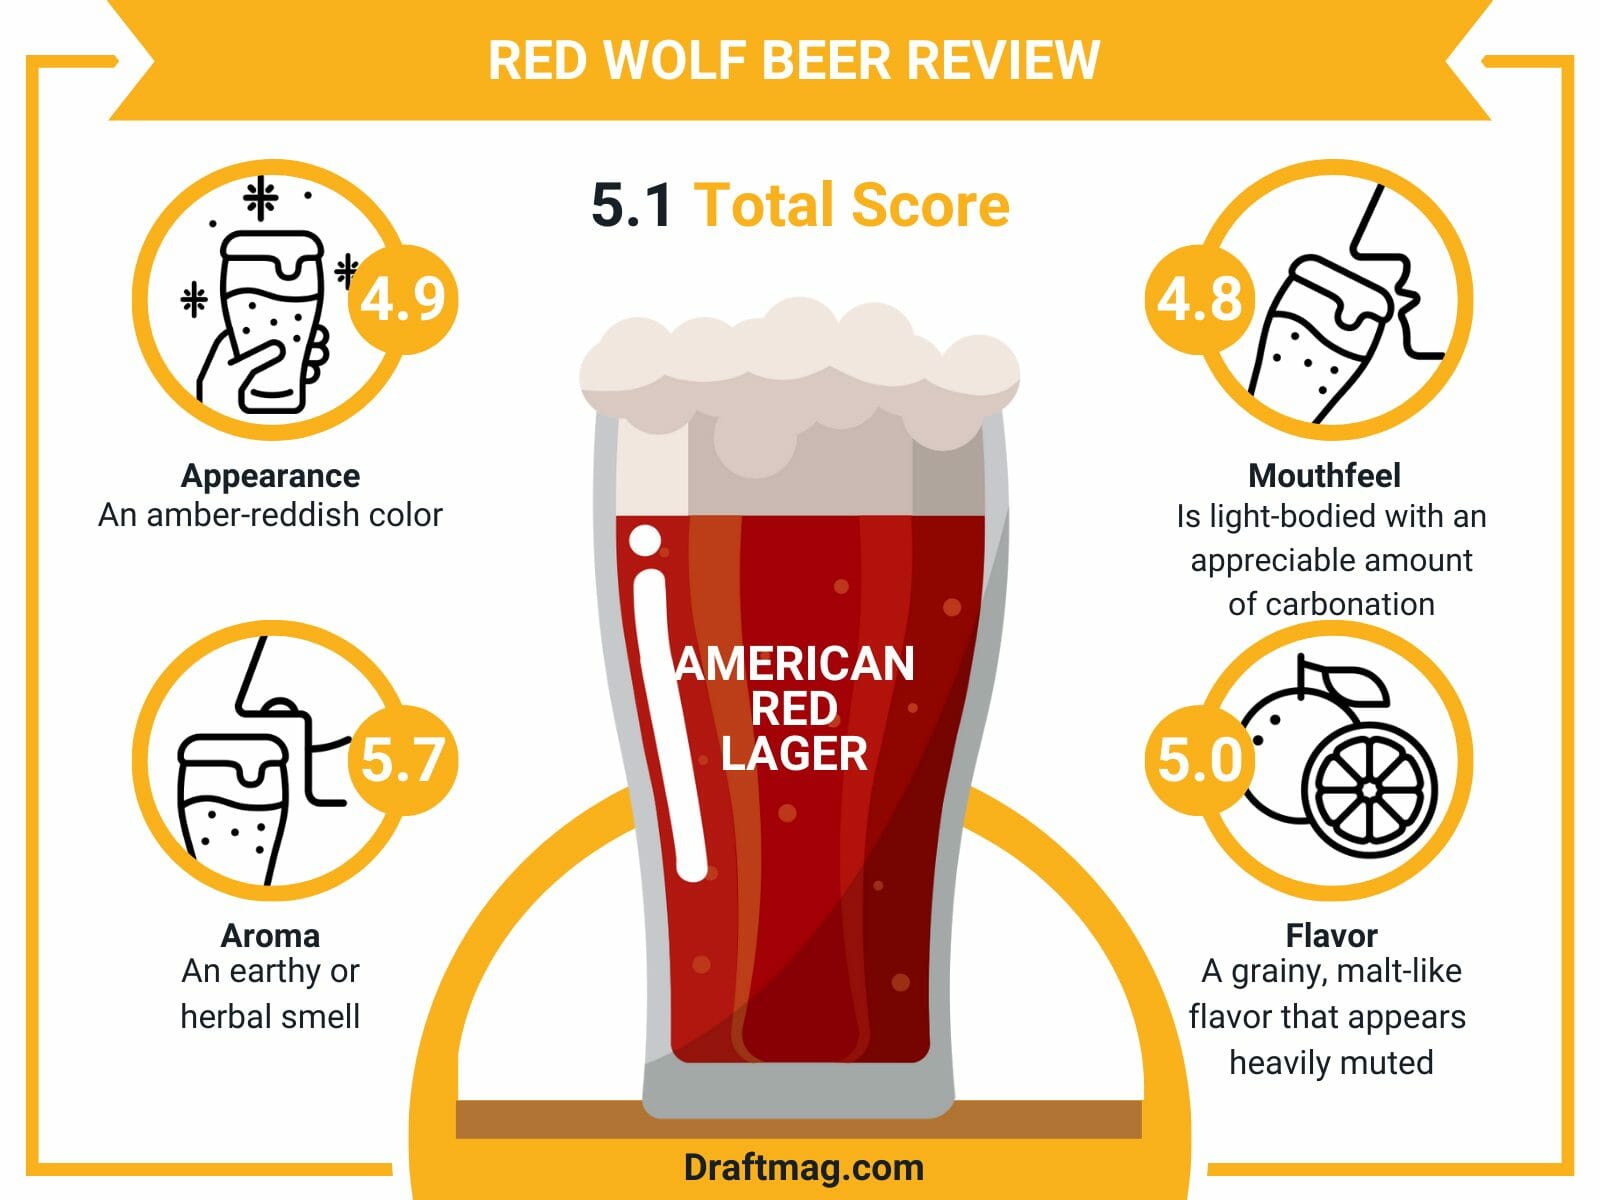 Red wolf beer review infographic